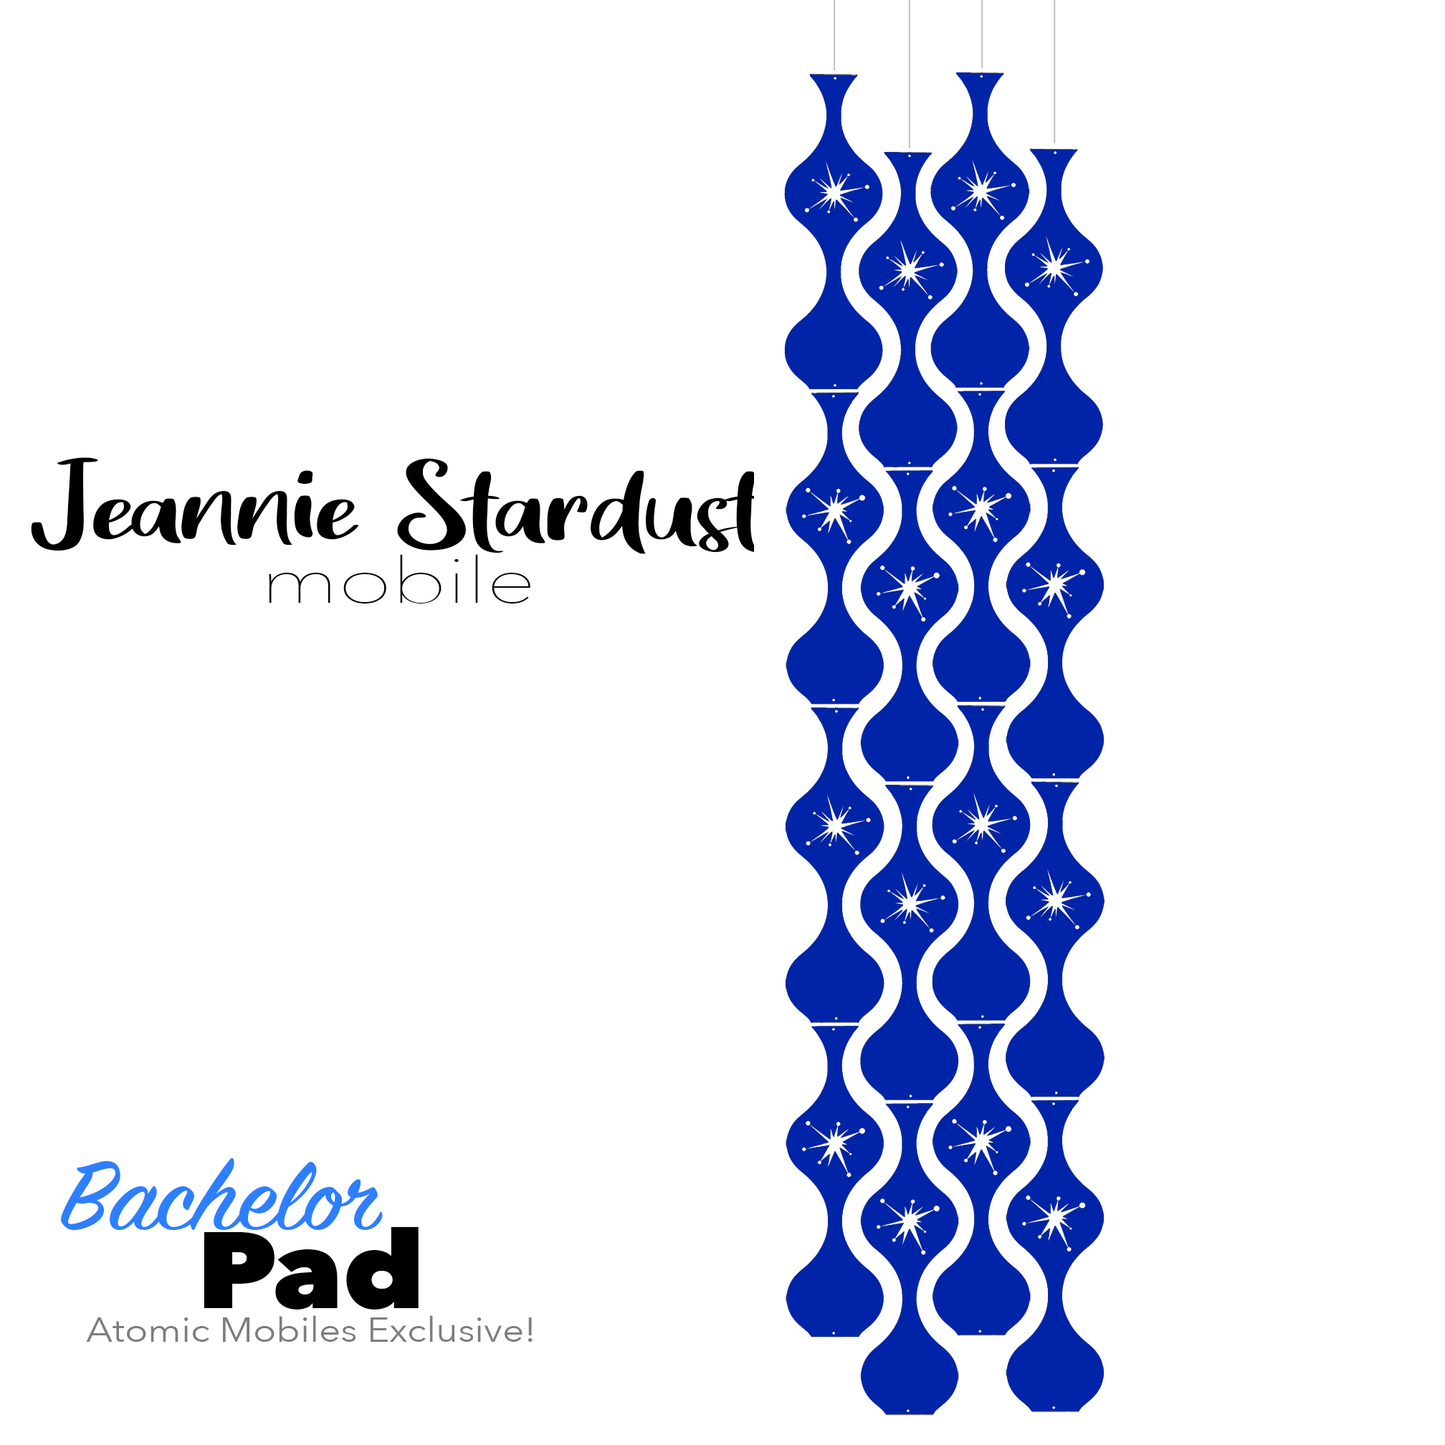 Bachelor Pad Jeannie Stardust Hanging Art Mobile - mid century modern home decor in Navy Blue - by AtomicMobiles.com